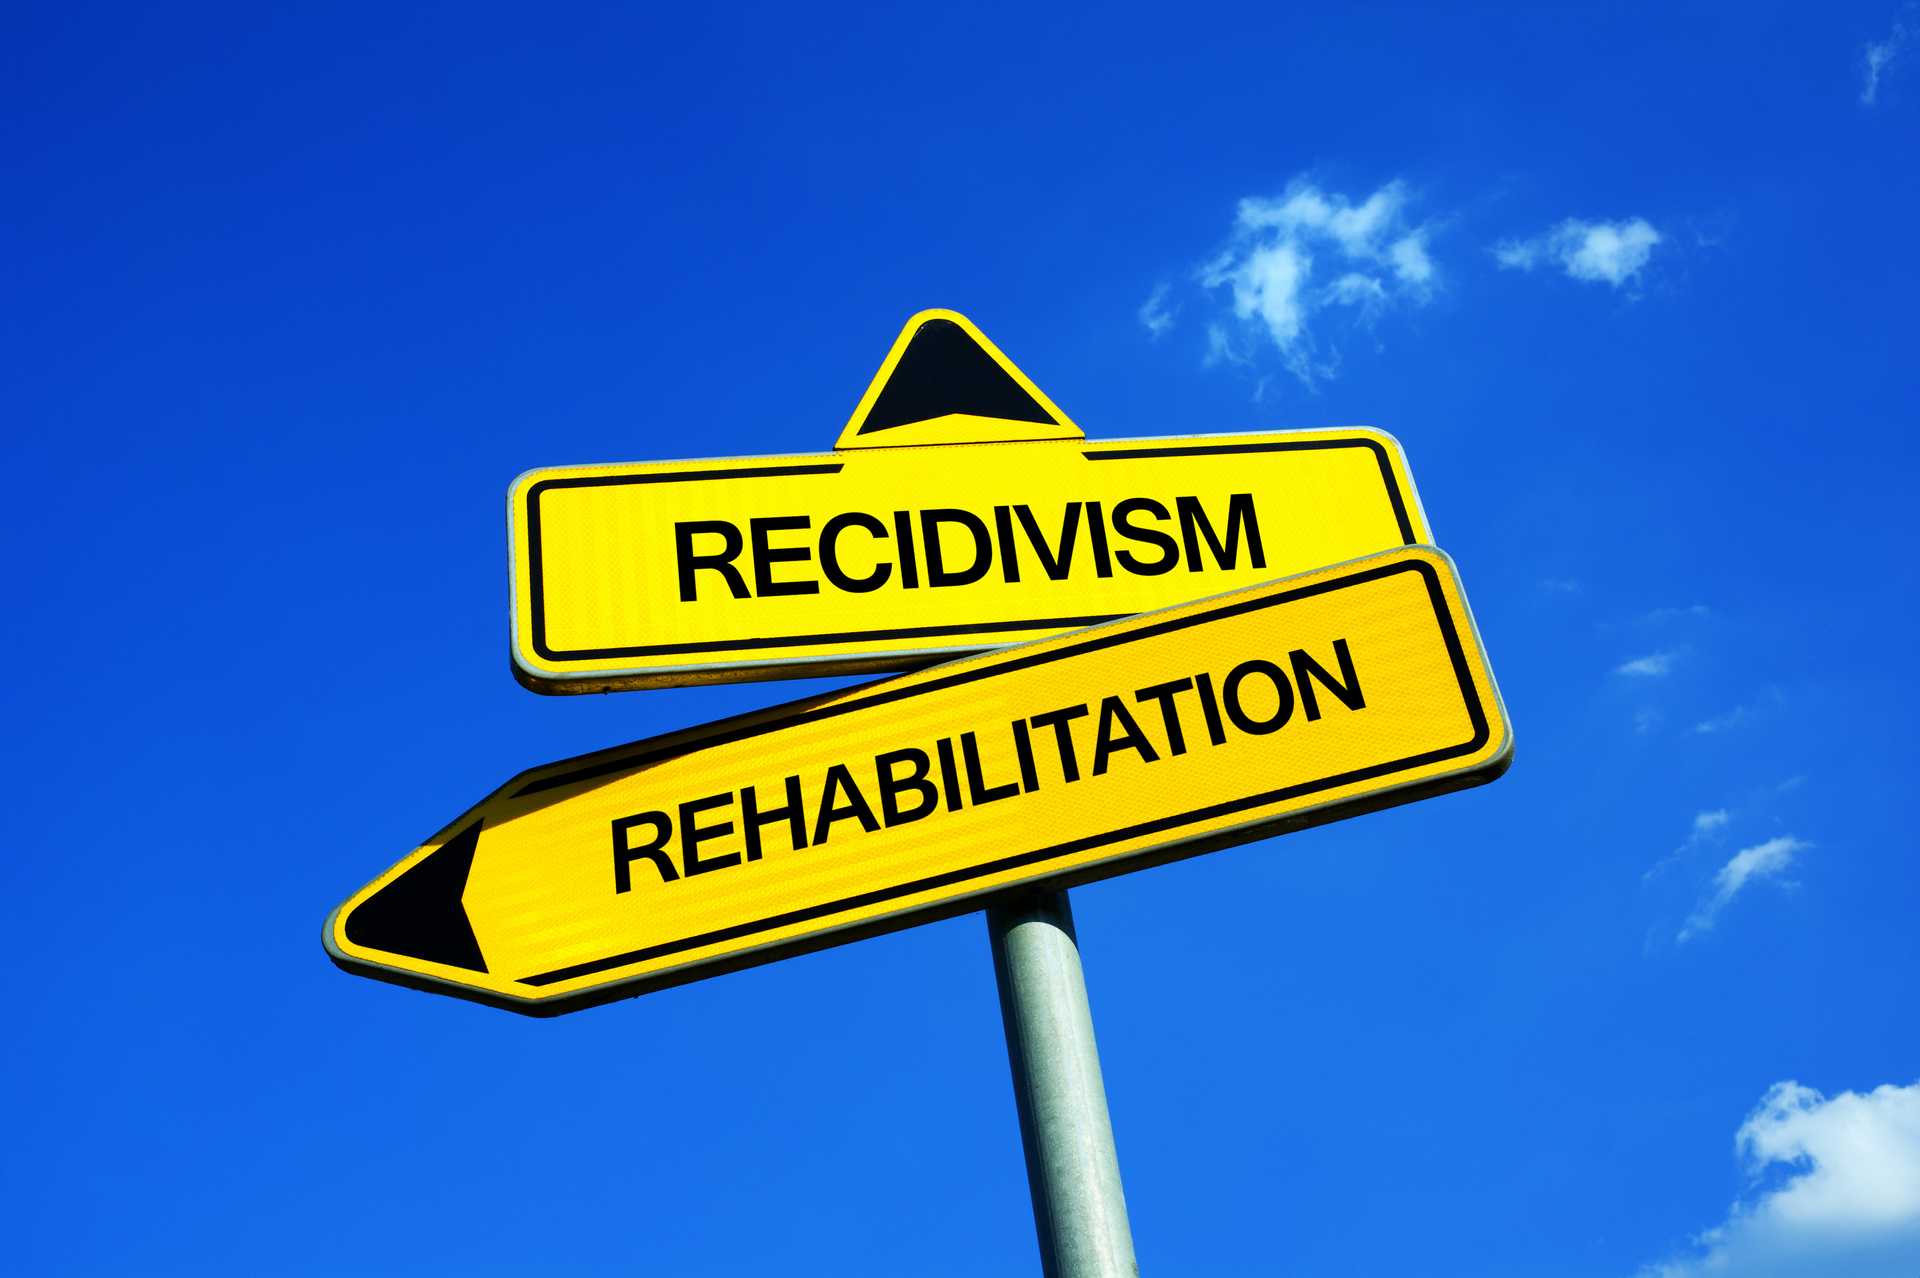 Recidivism or Rehabilitation - Traffic sign with two options - repeated criminality and sentencing of convicted criminal vs correction and reformation of former delinquent